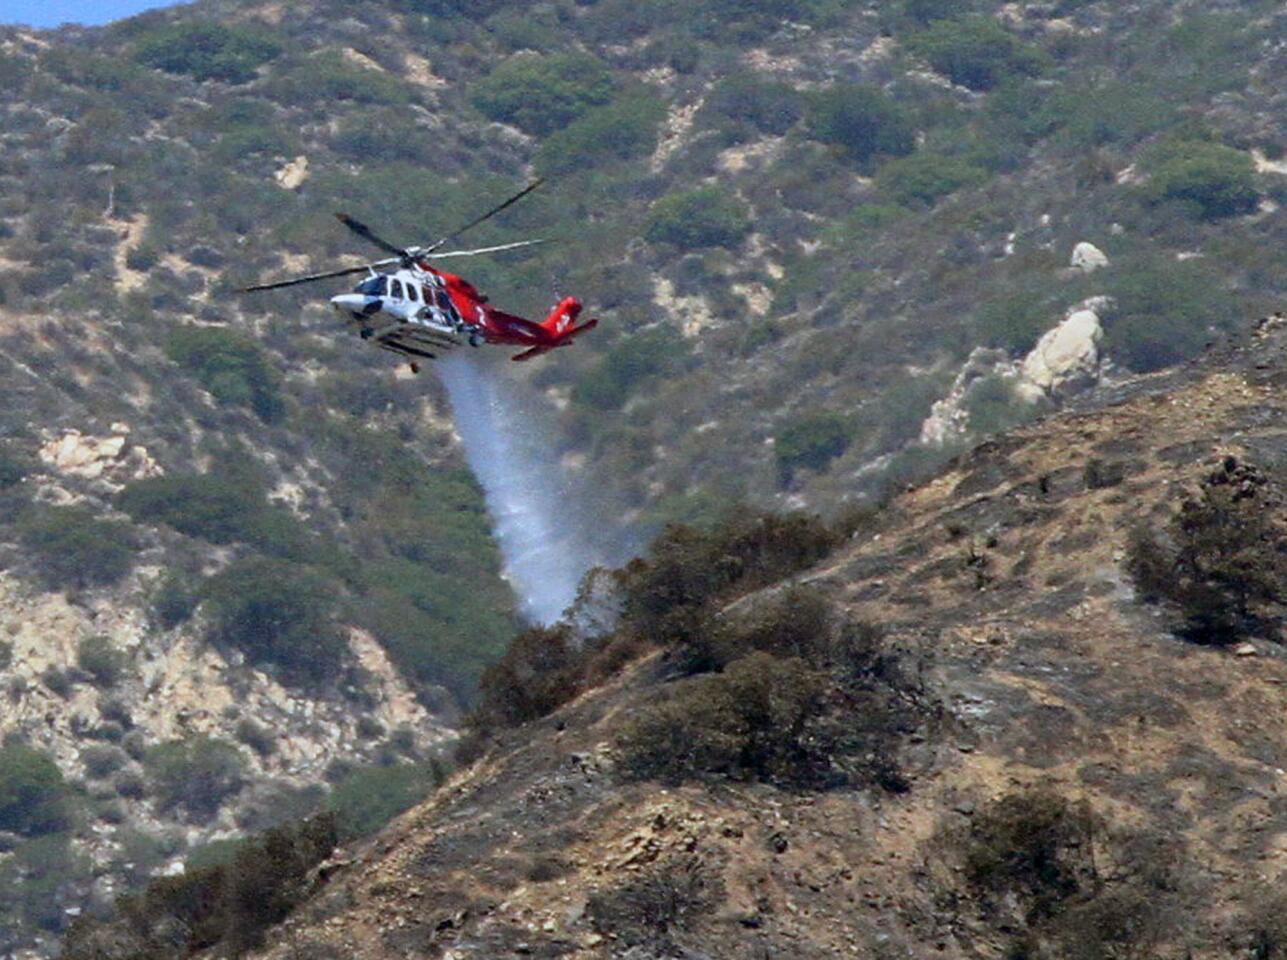 A Los Angeles Fire Department helicopter drops water on a hot spot in the Verdugo Mountains where the a brushfire, that started yesterday, continues to burn on Monday, June 23, 2014. The fire is above Brand Park, and hasn't threatened any structures.